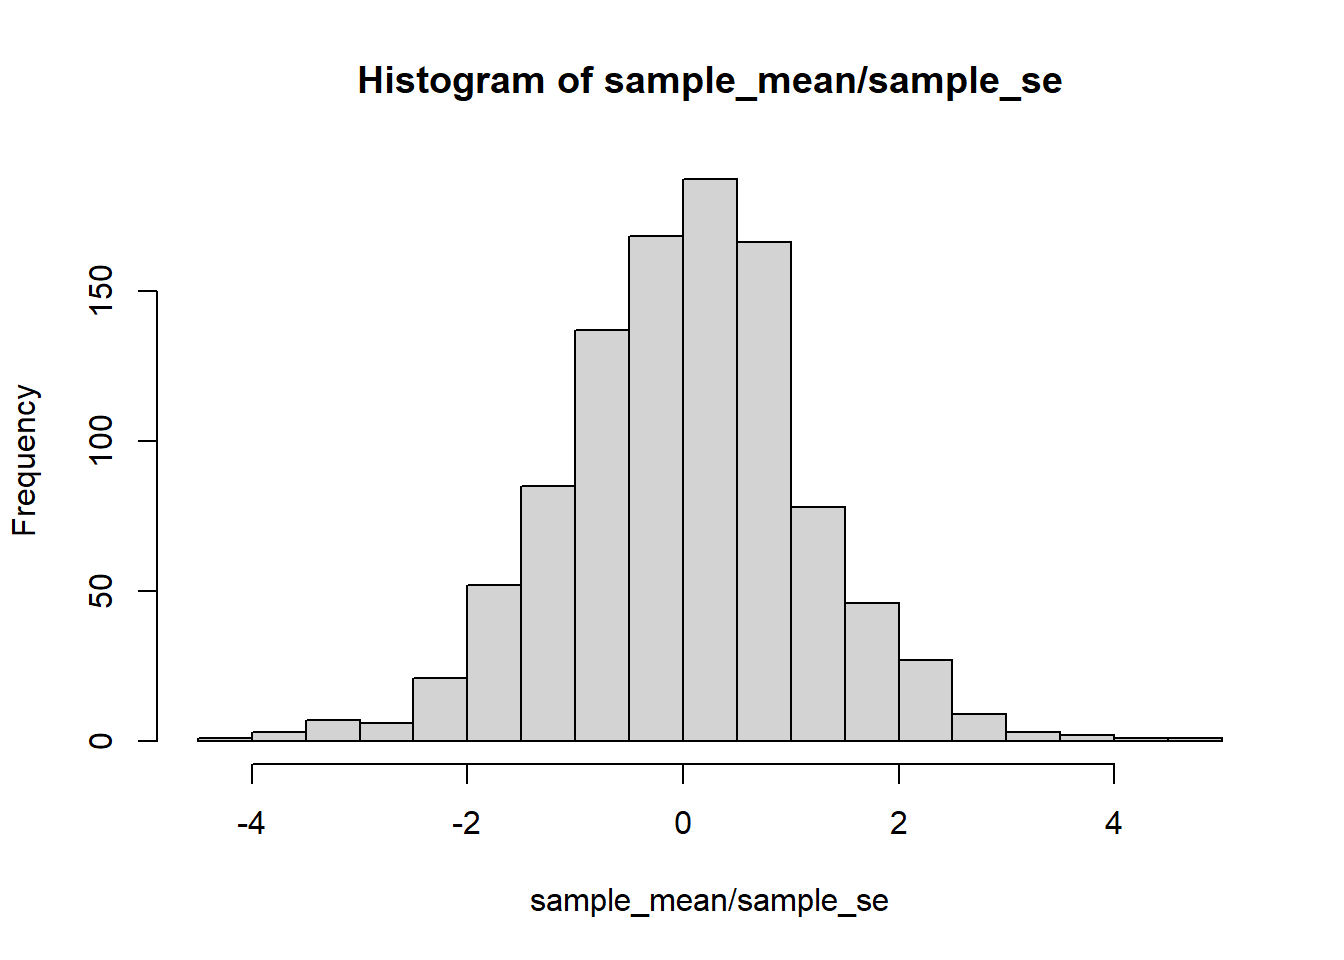 A histogram of the sample means divided by the sample standard errors, this is a t-distribution